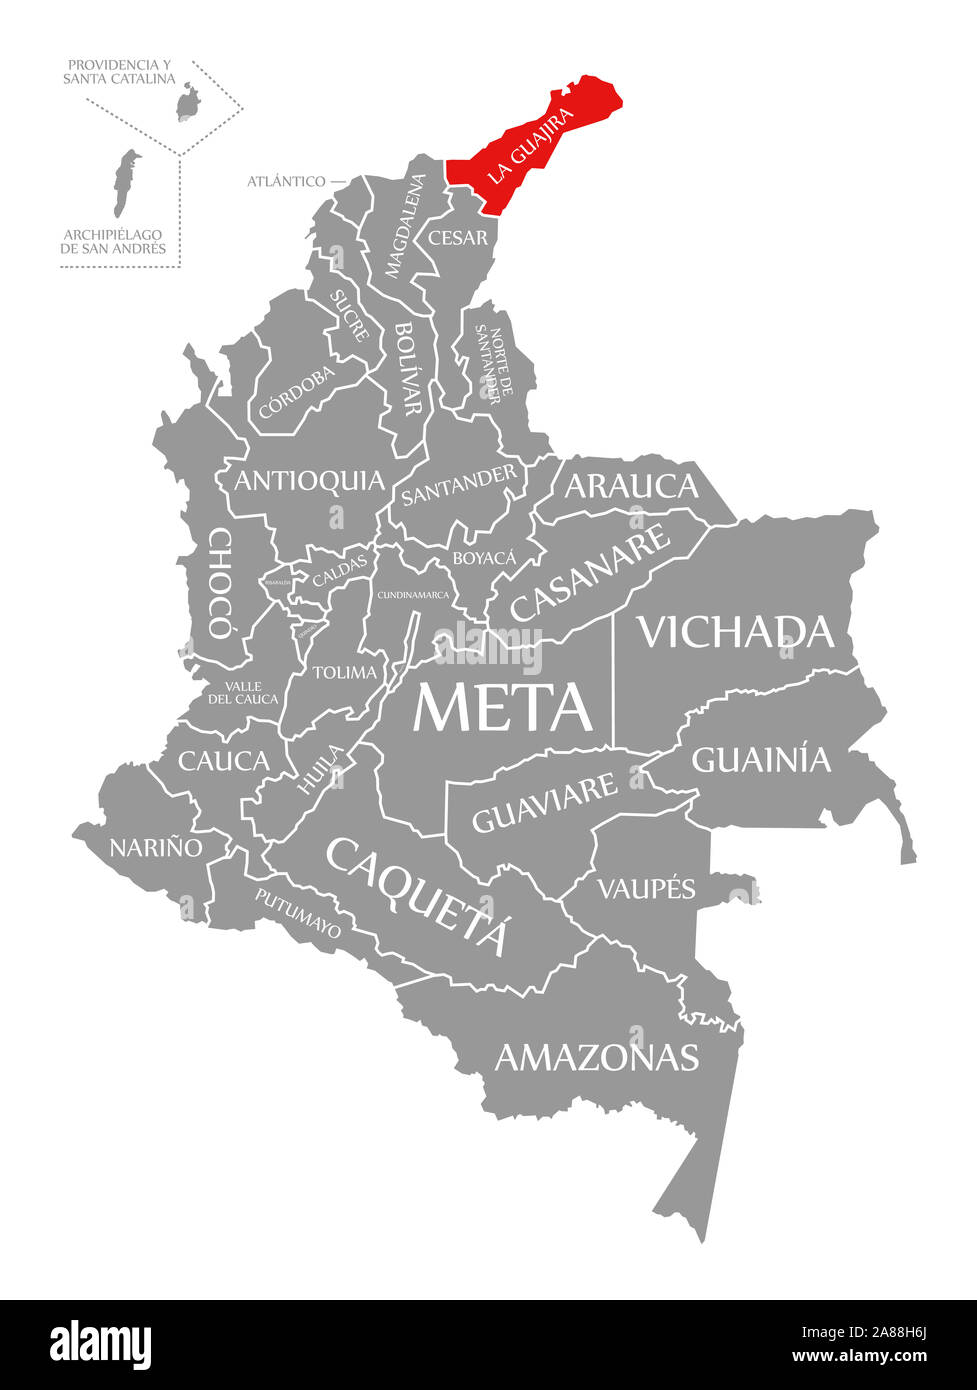 La Guajira red highlighted in map of Colombia Stock Photo